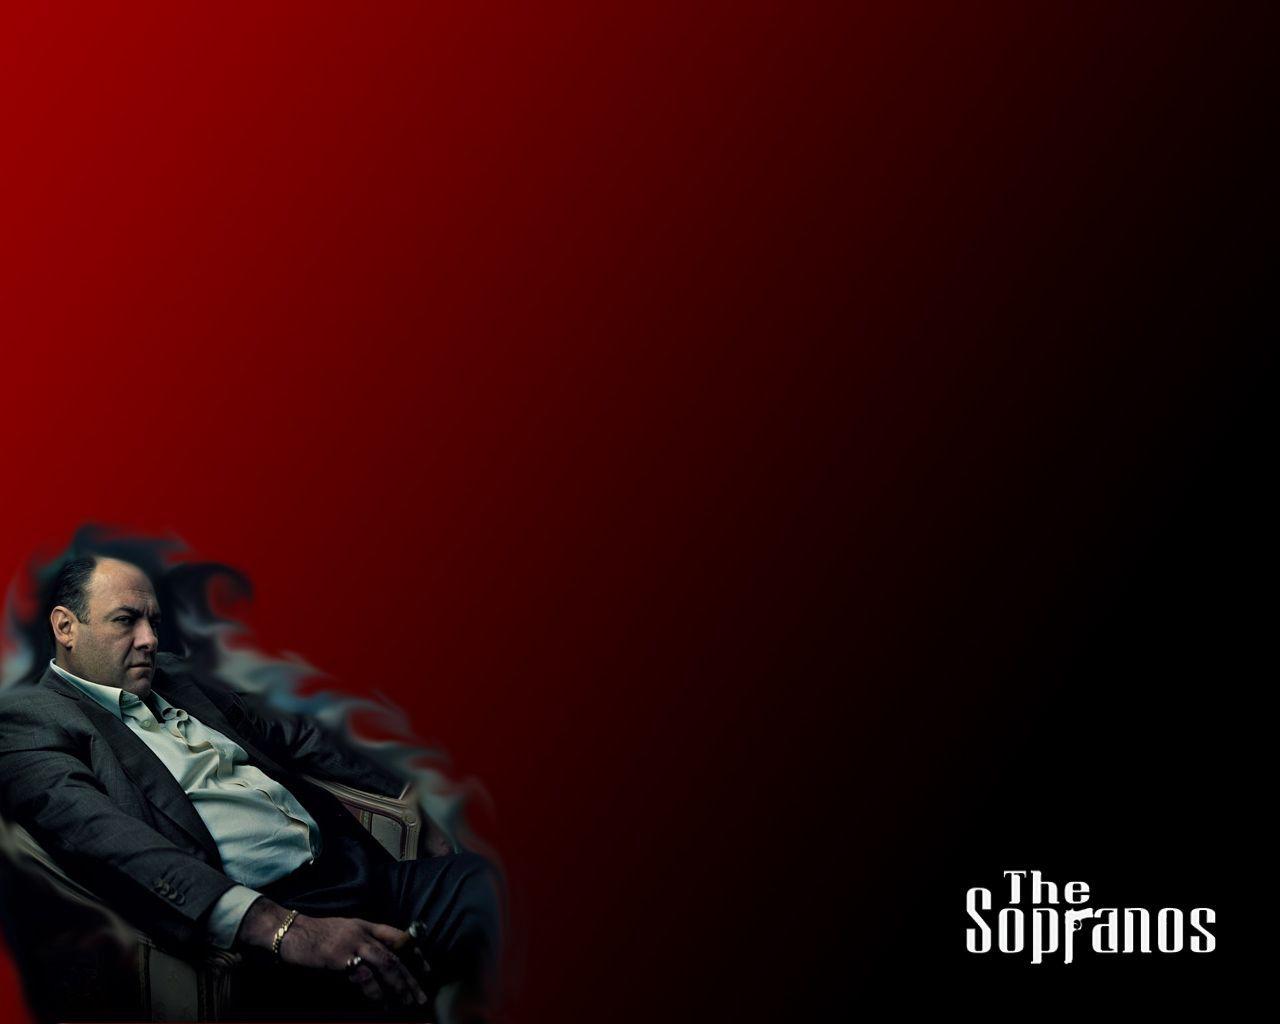 The Sopranos Wallpapers by Millsy